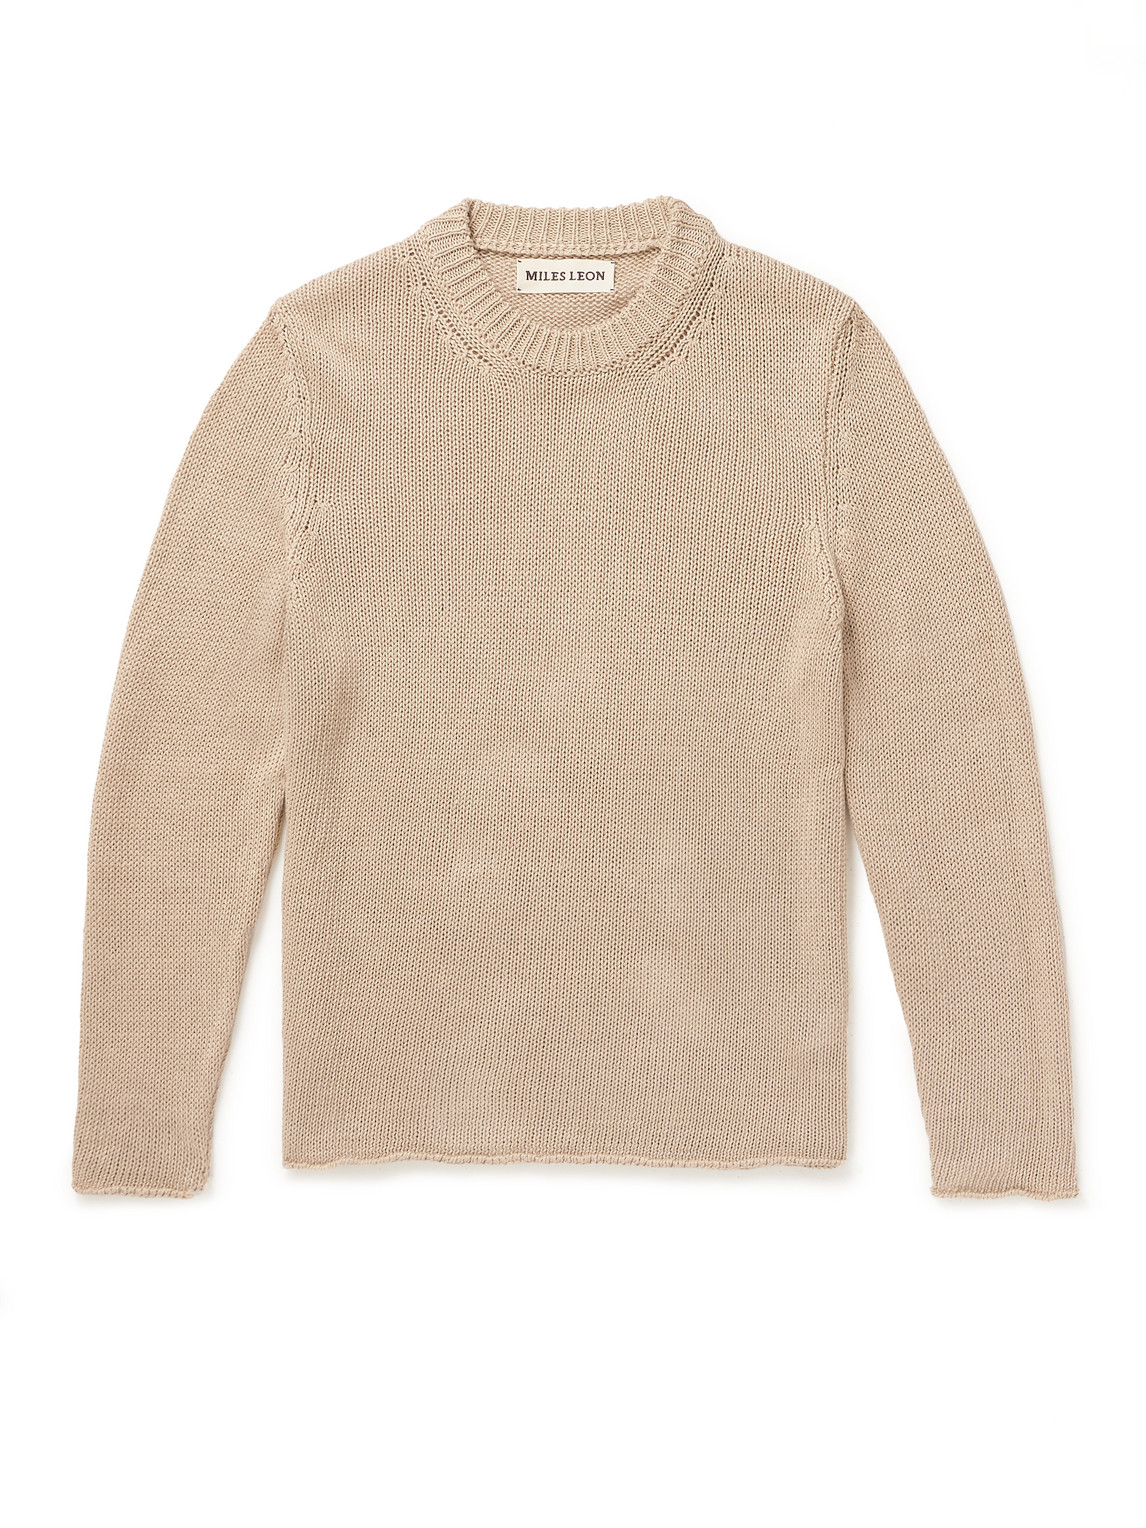 Miles Leon Linen And Cotton-blend Sweater In Neutrals